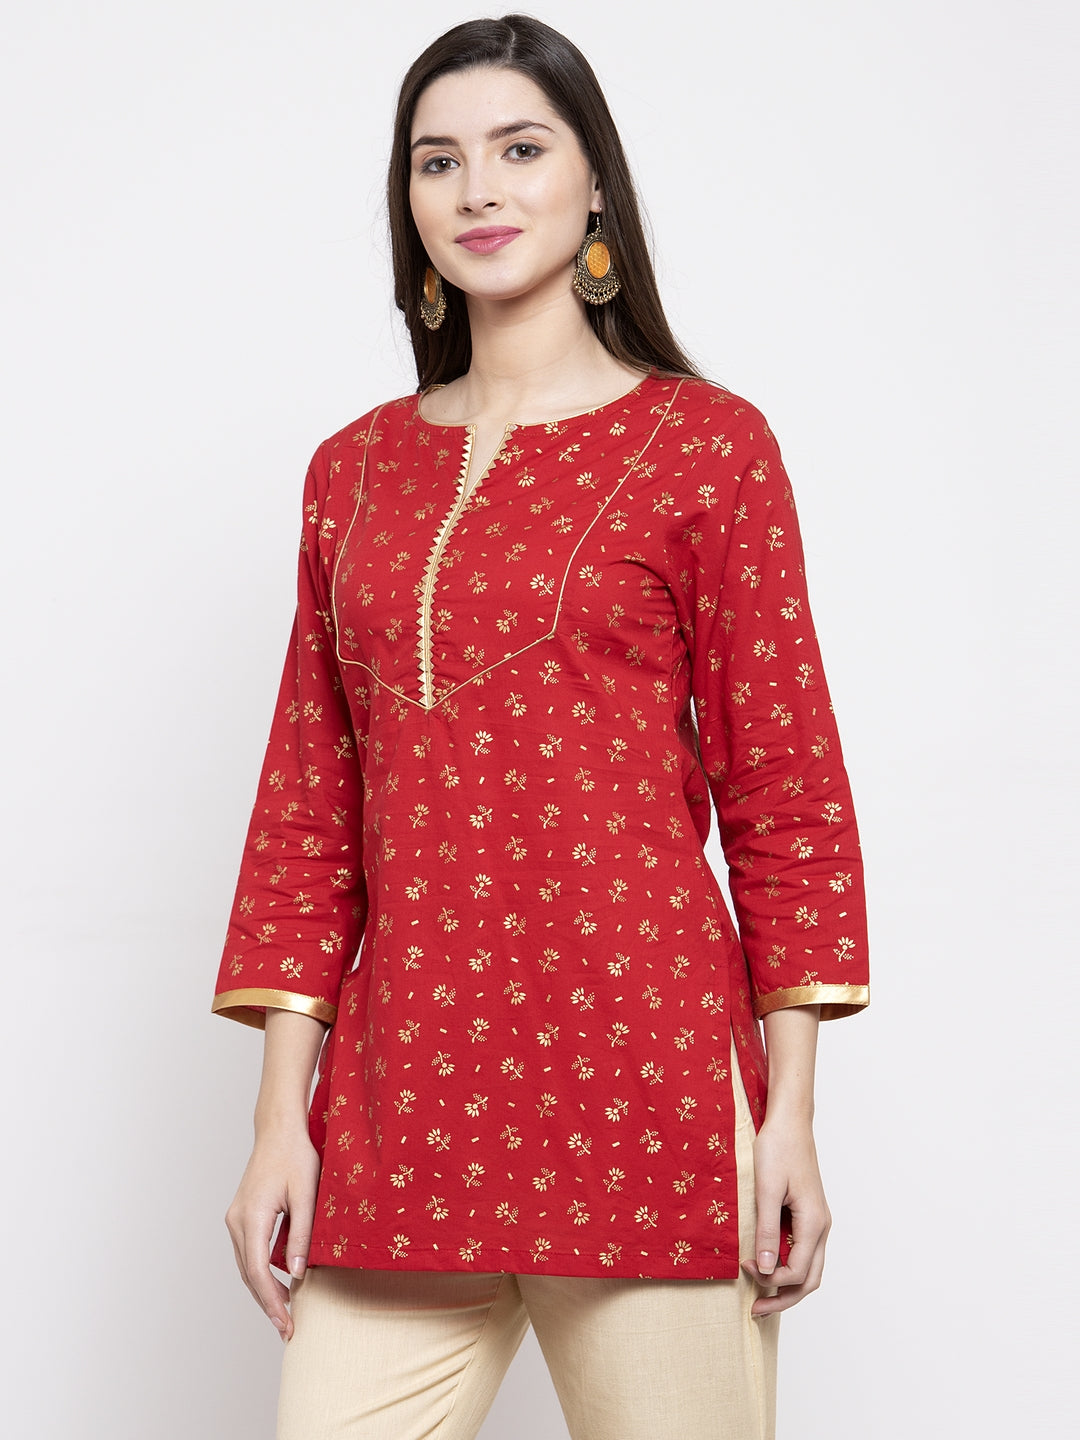 Bhama Couture Red Printed Ethnic Tunic